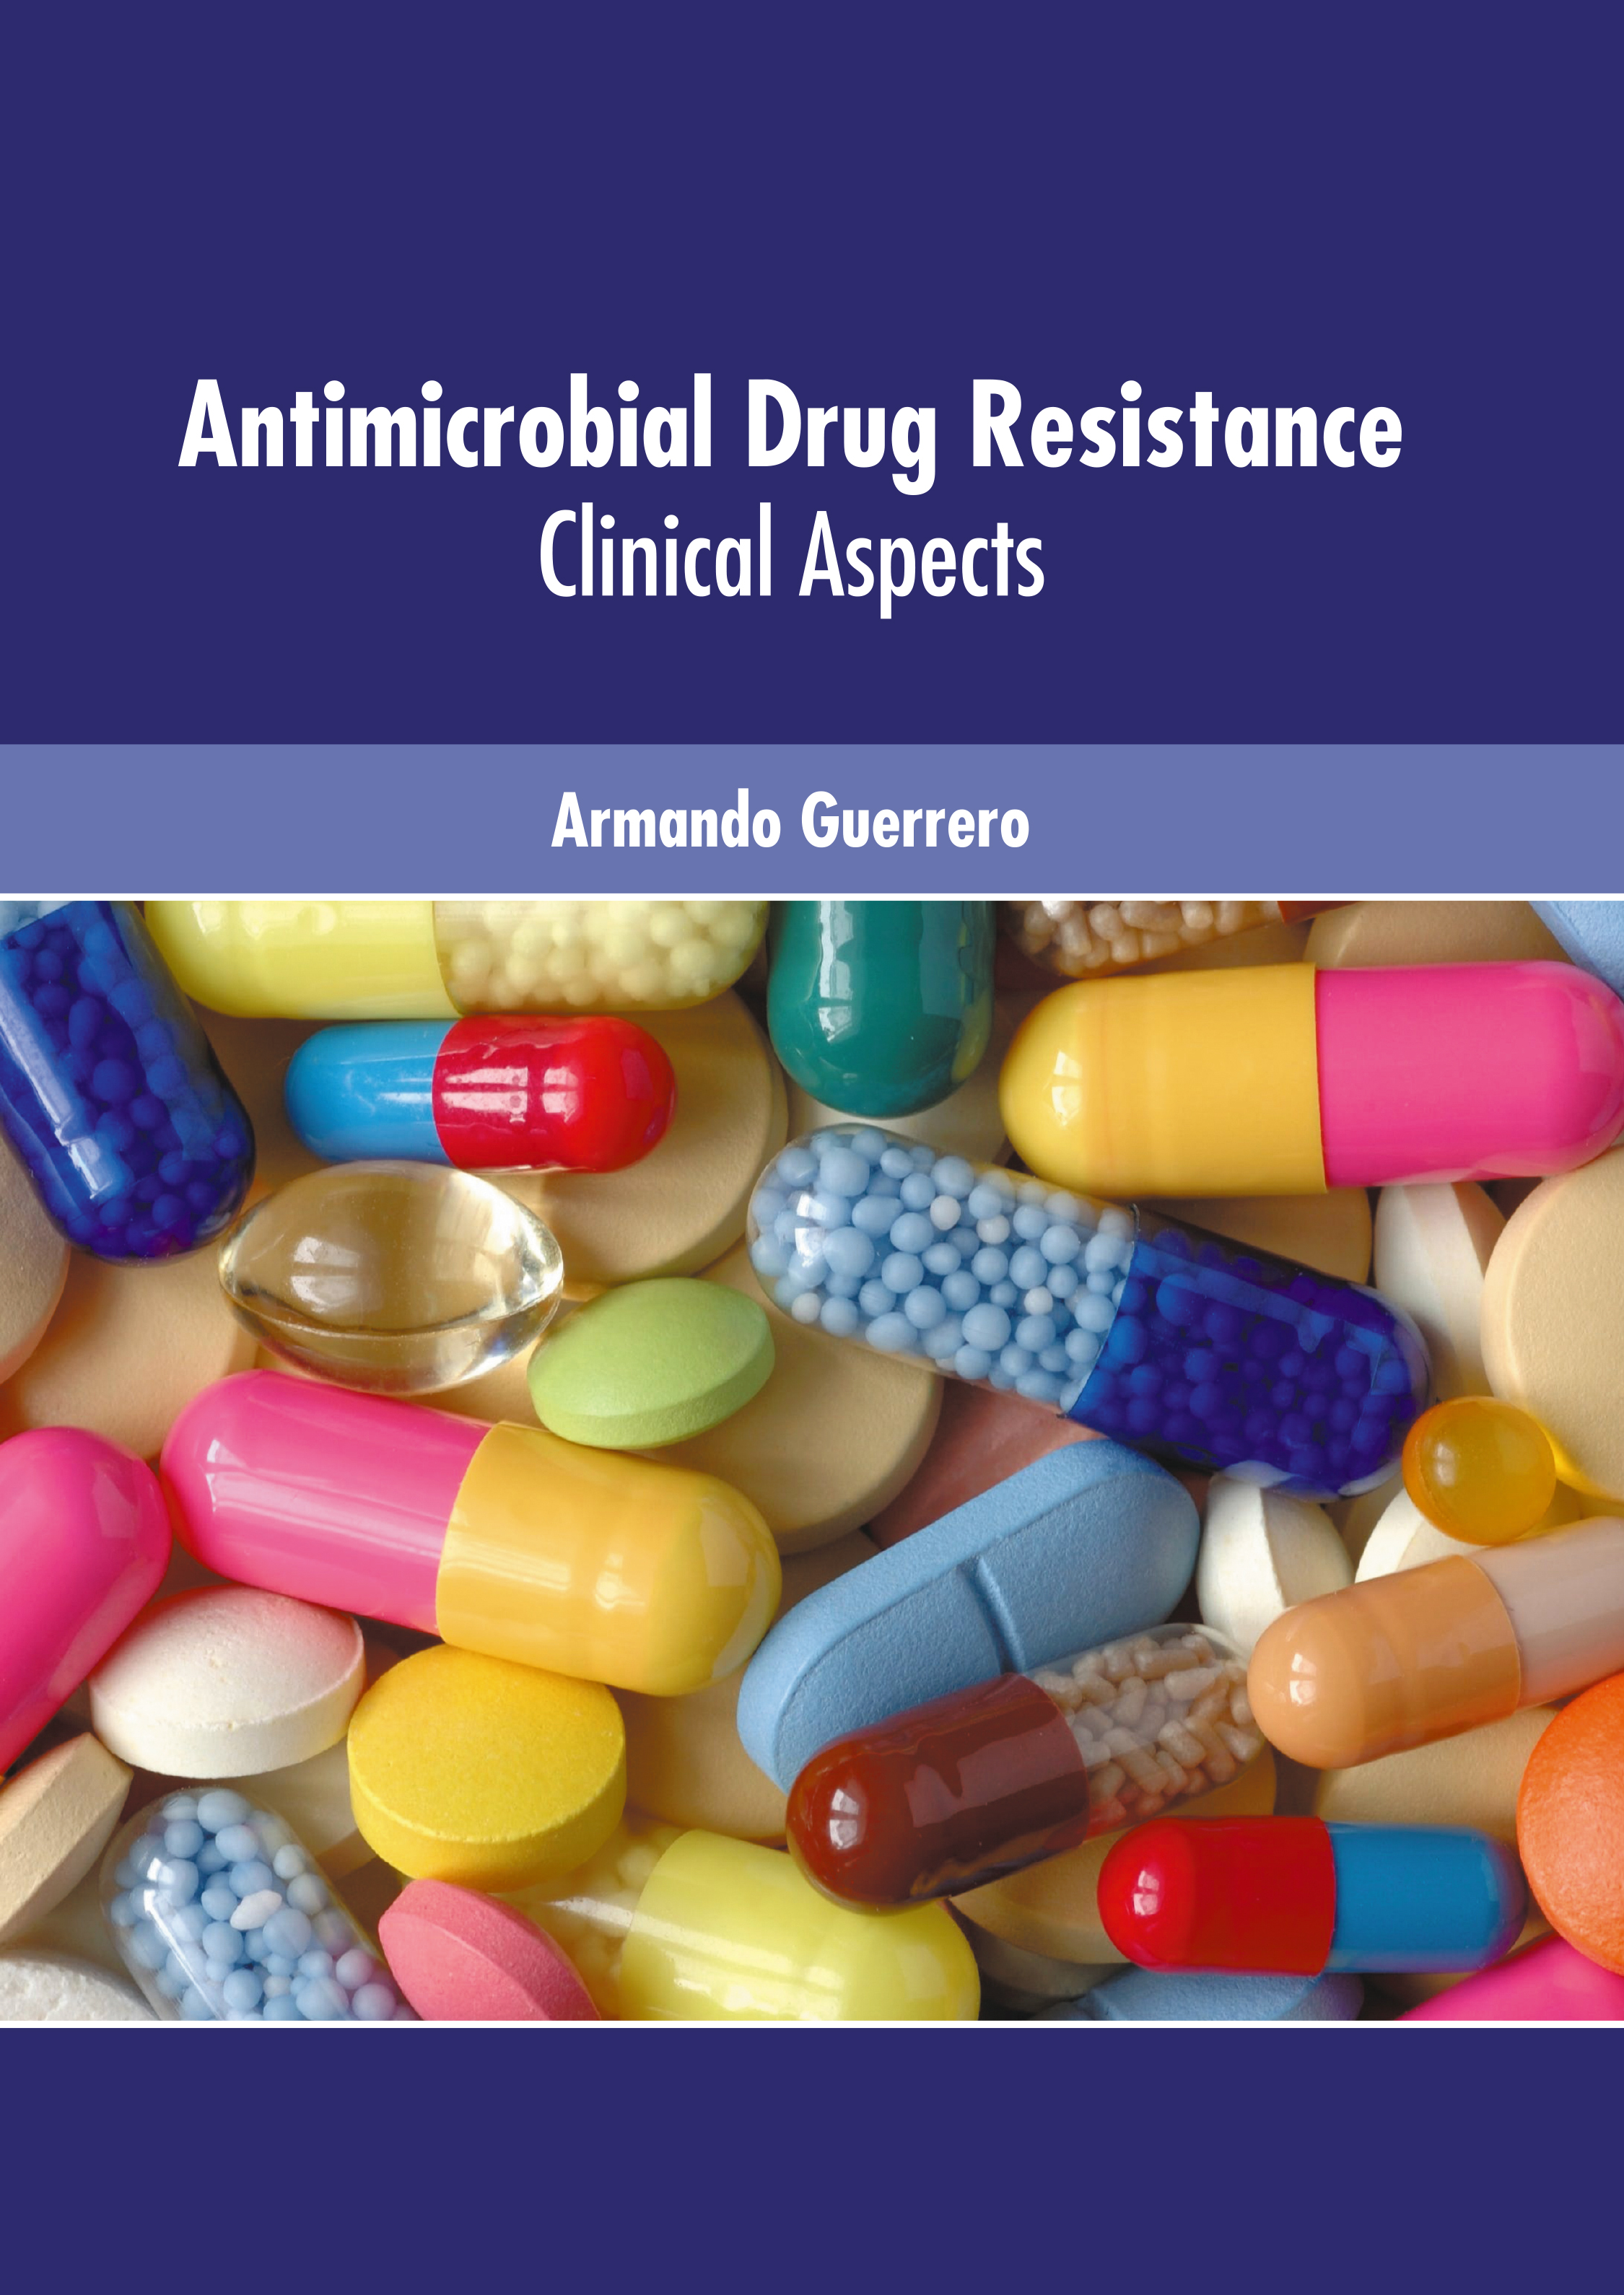 ANTIMICROBIAL DRUG RESISTANCE: CLINICAL ASPECTS- ISBN: 9781639272174